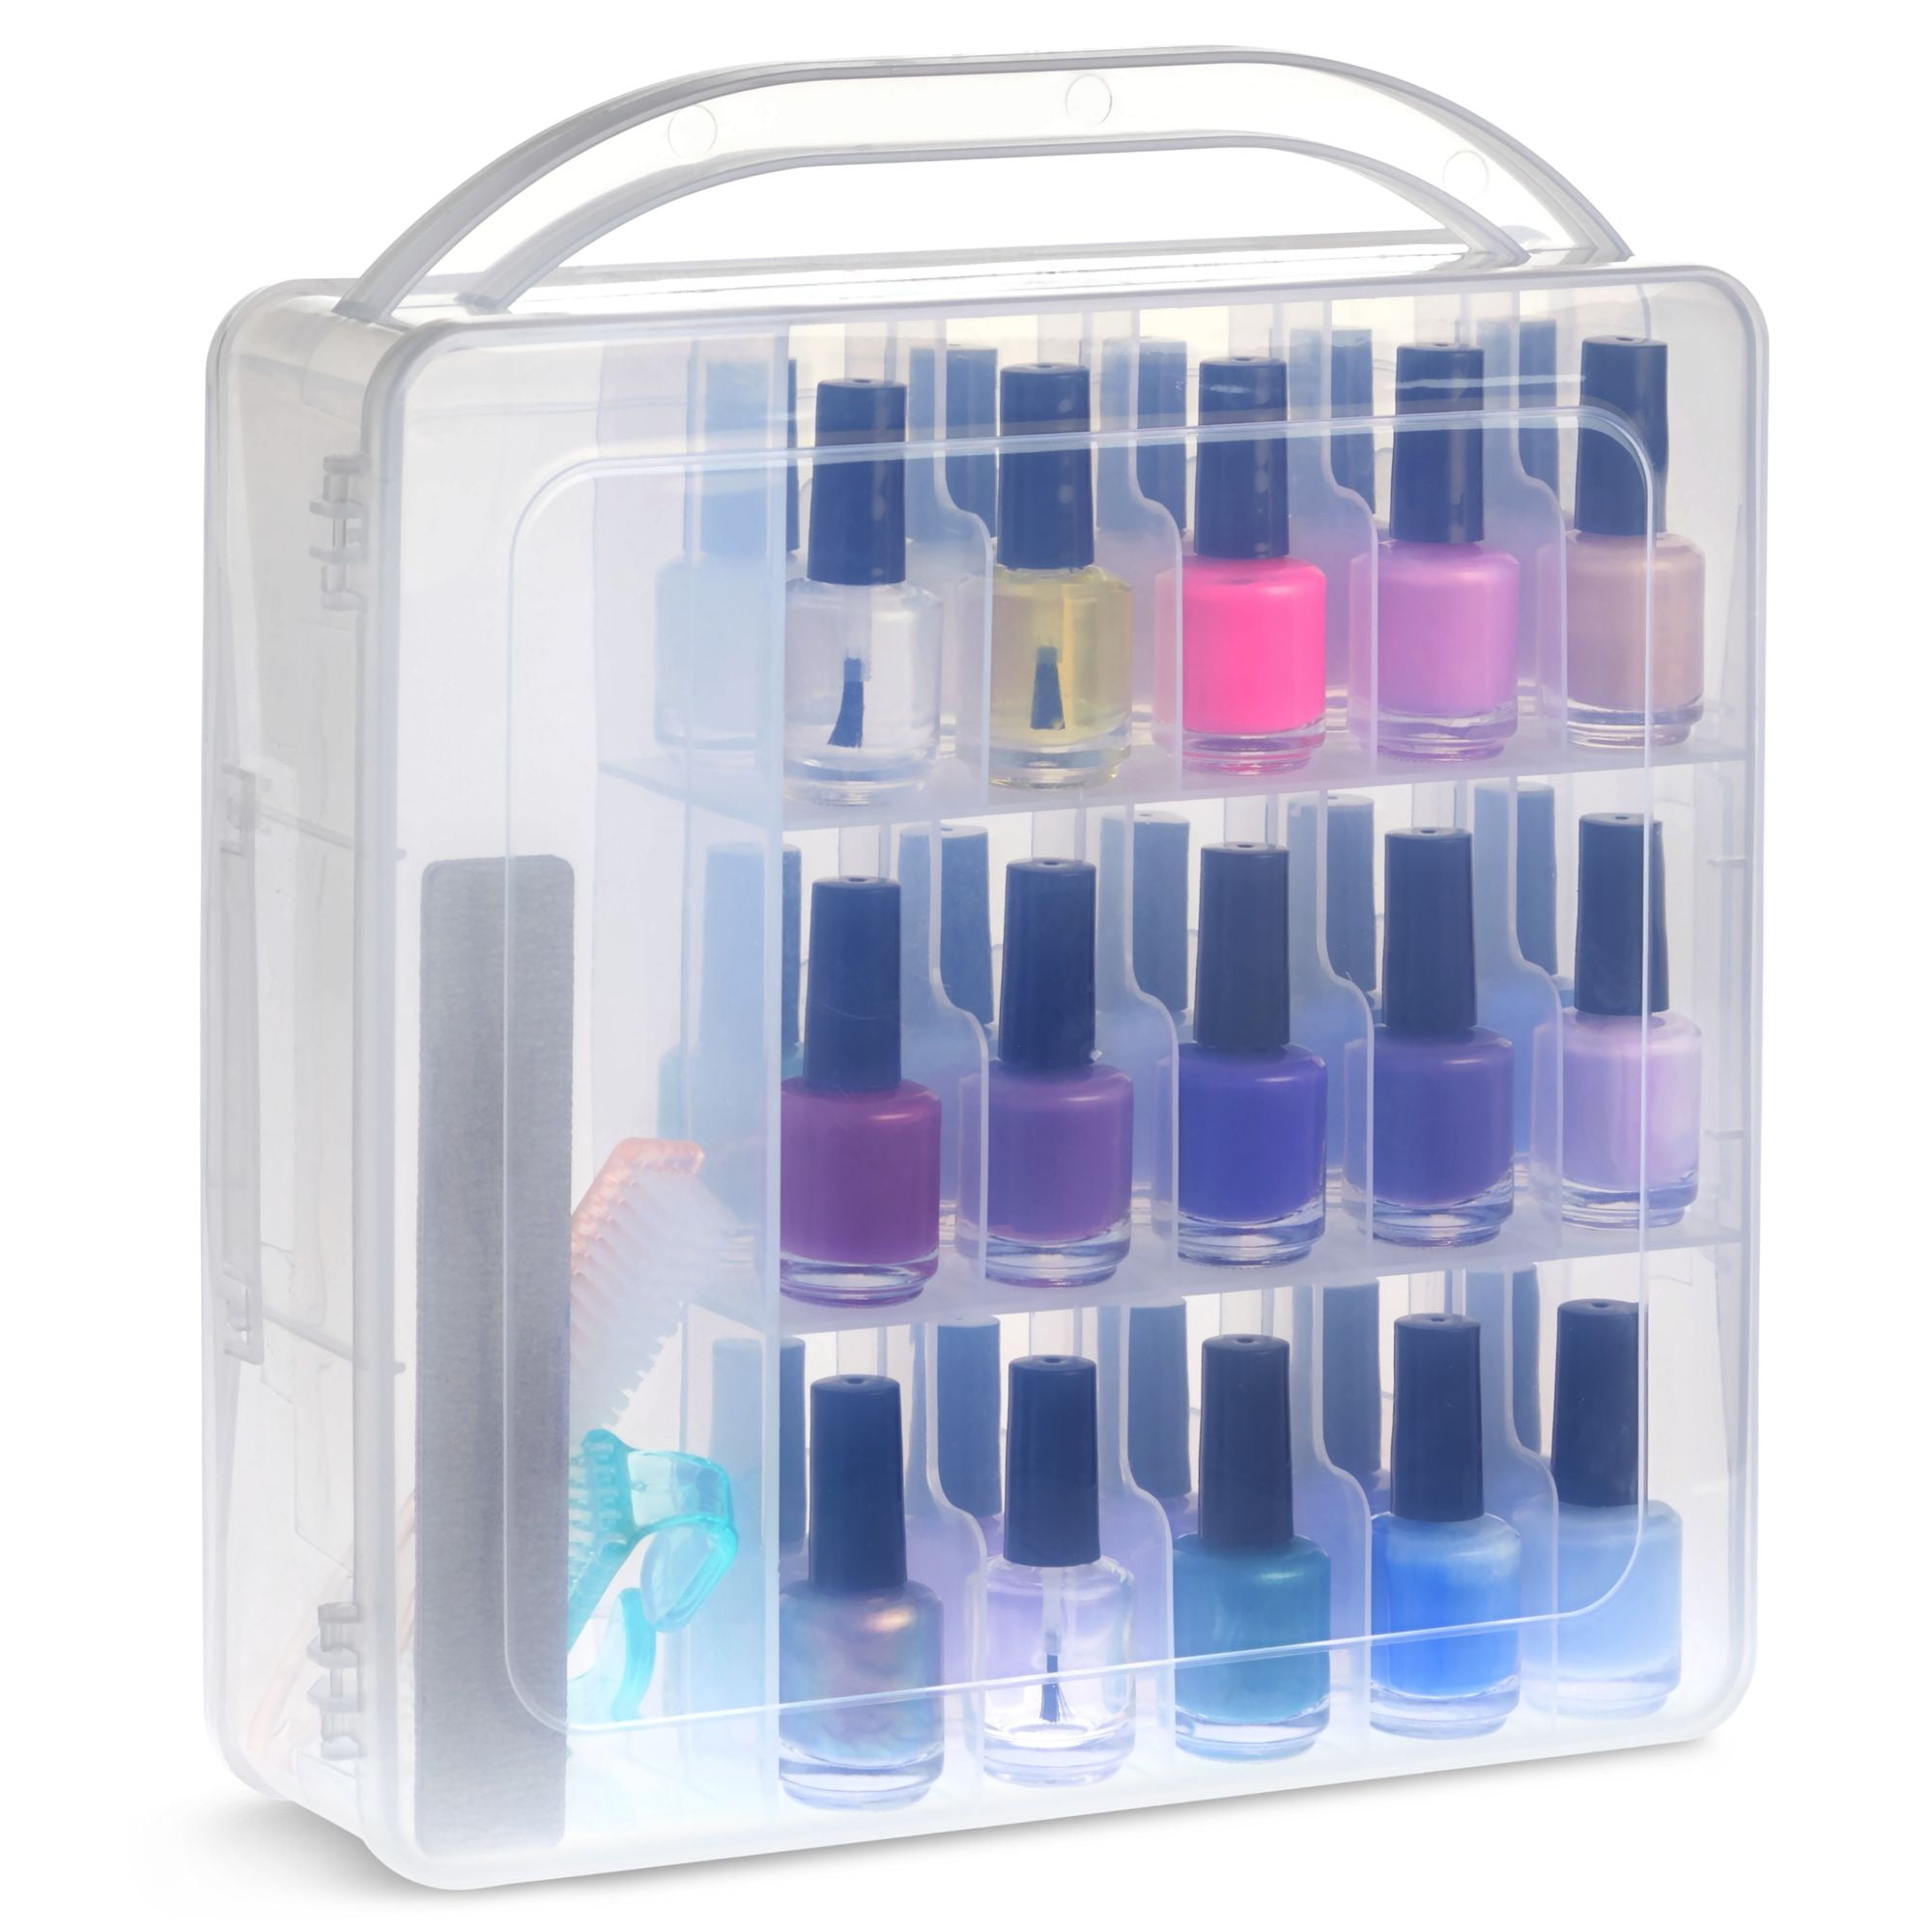 Nail Polish Organizer Case with Lid and Handle, Holds 30 Bottles (Pink,  11.8 x 11.2 x 3.15 In)